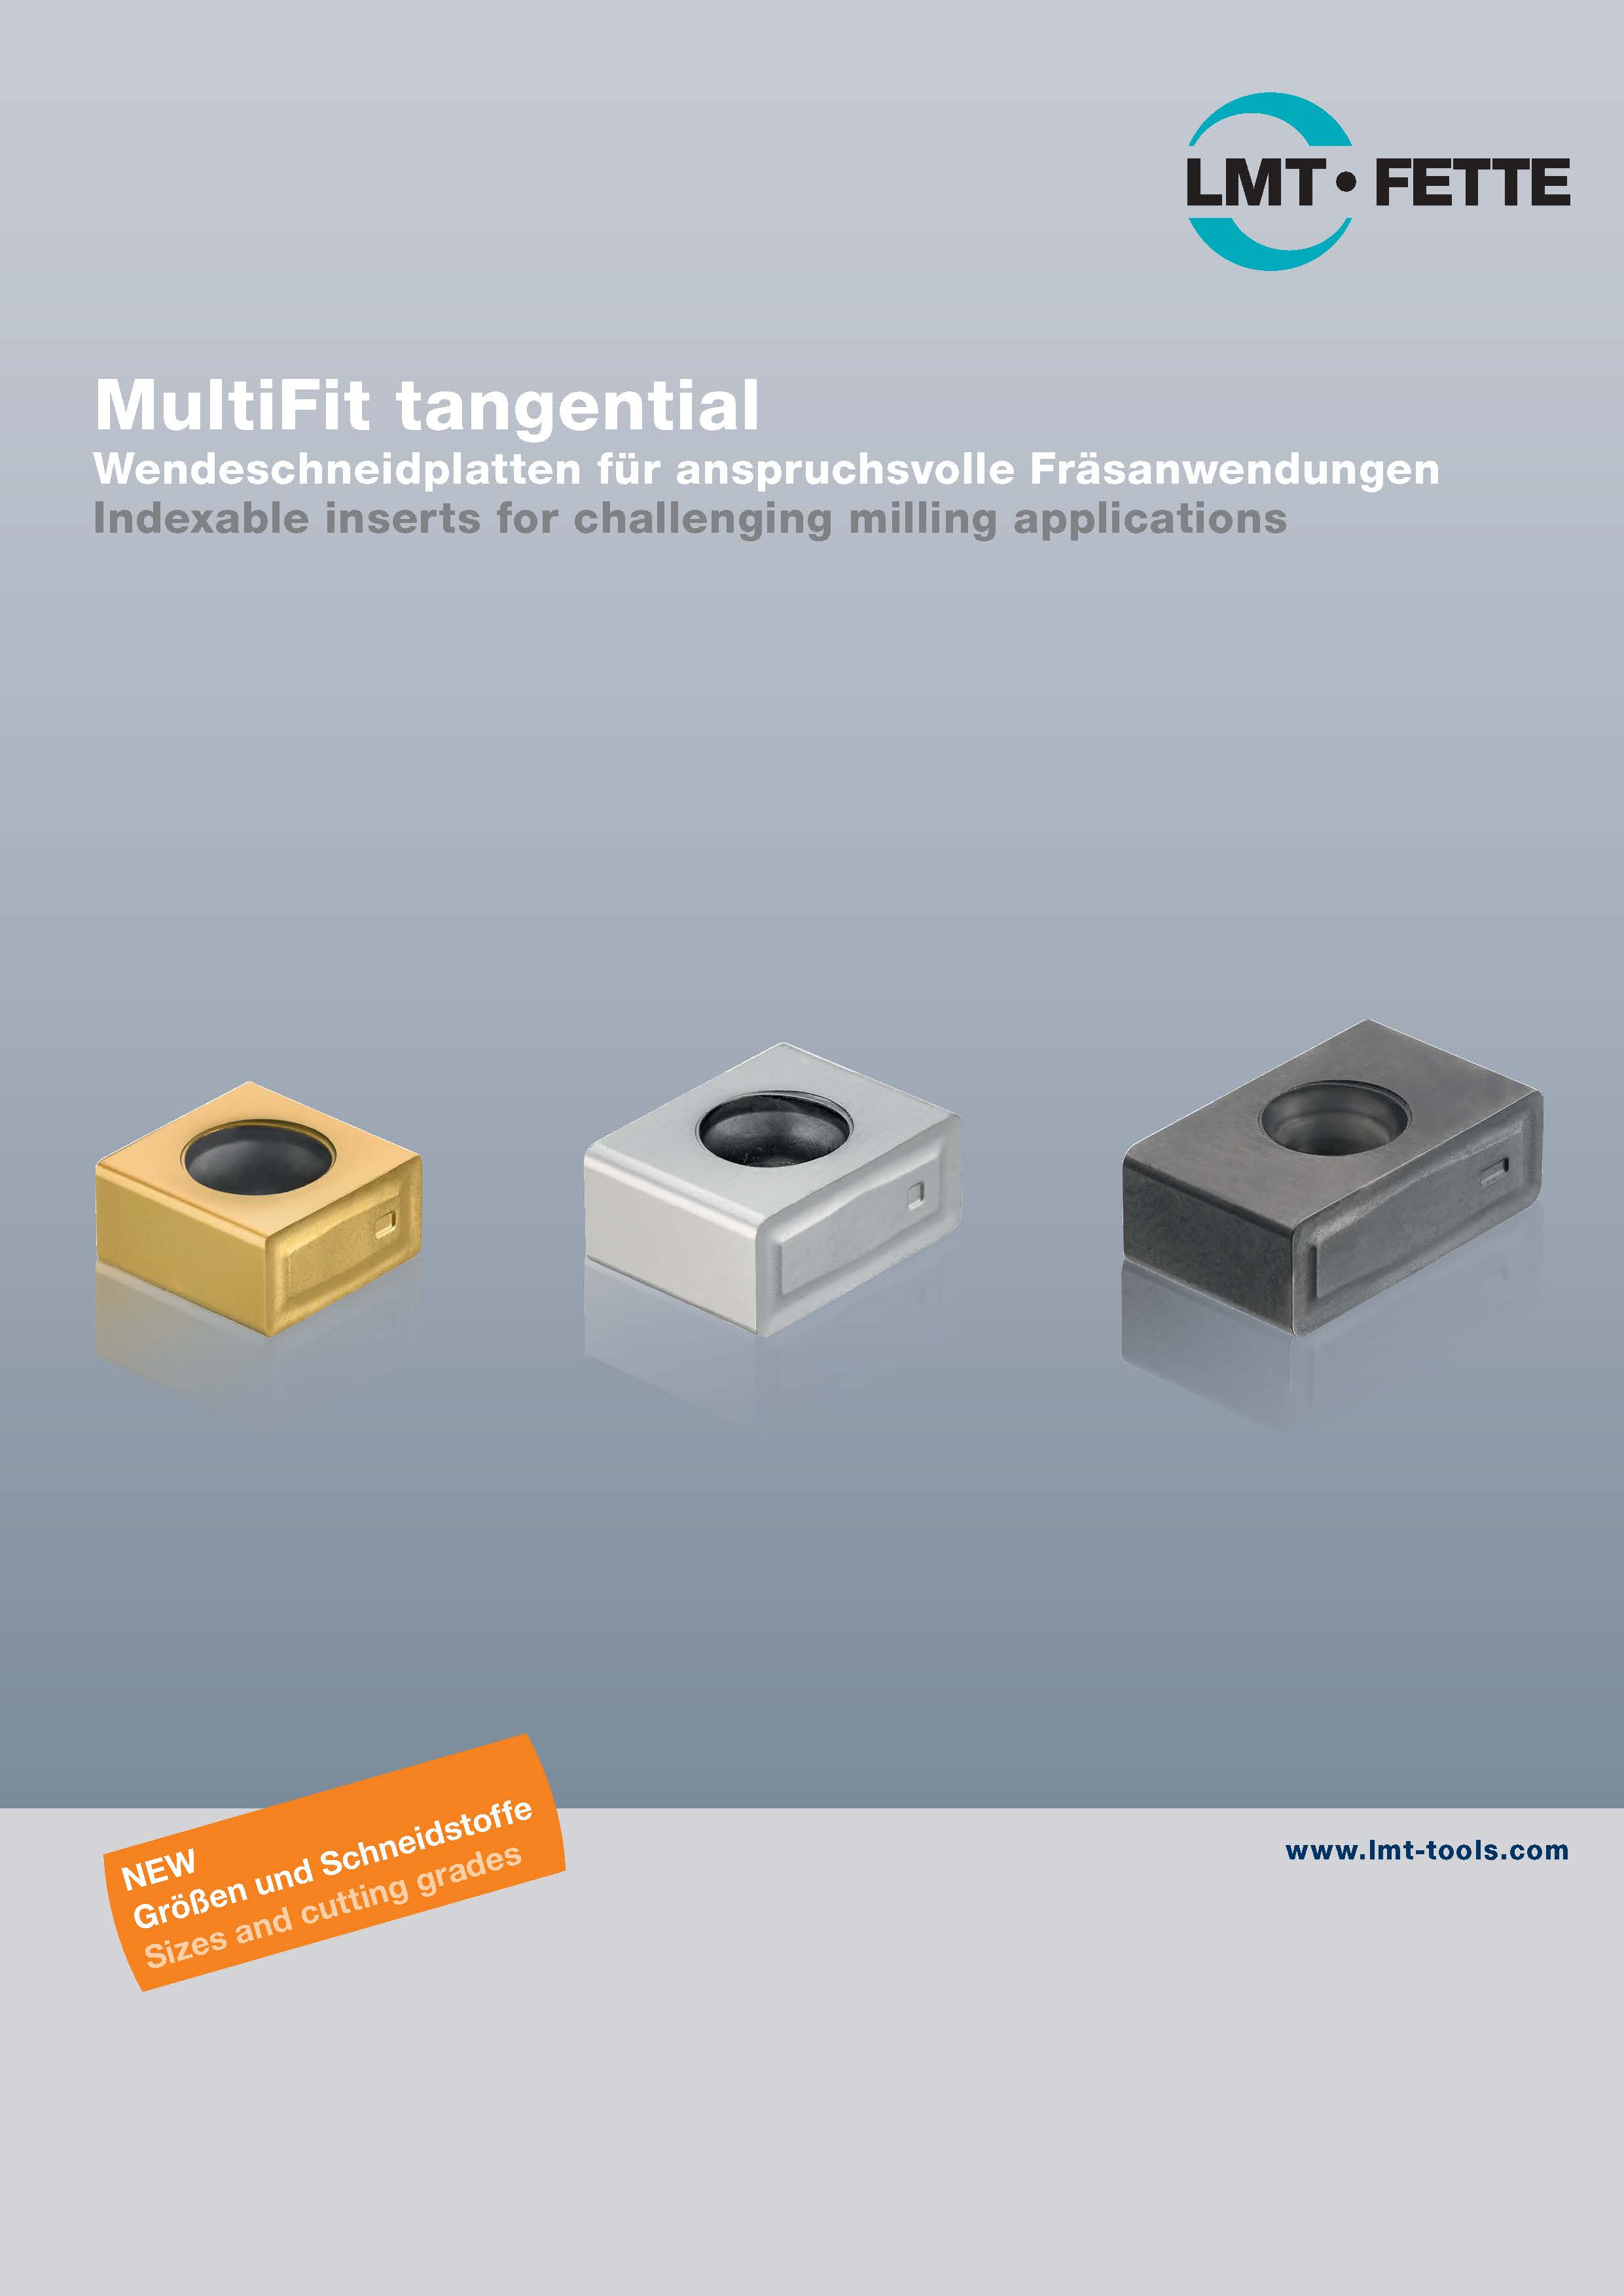 MultiFit tangential: Indexable inserts for challenging milling applications